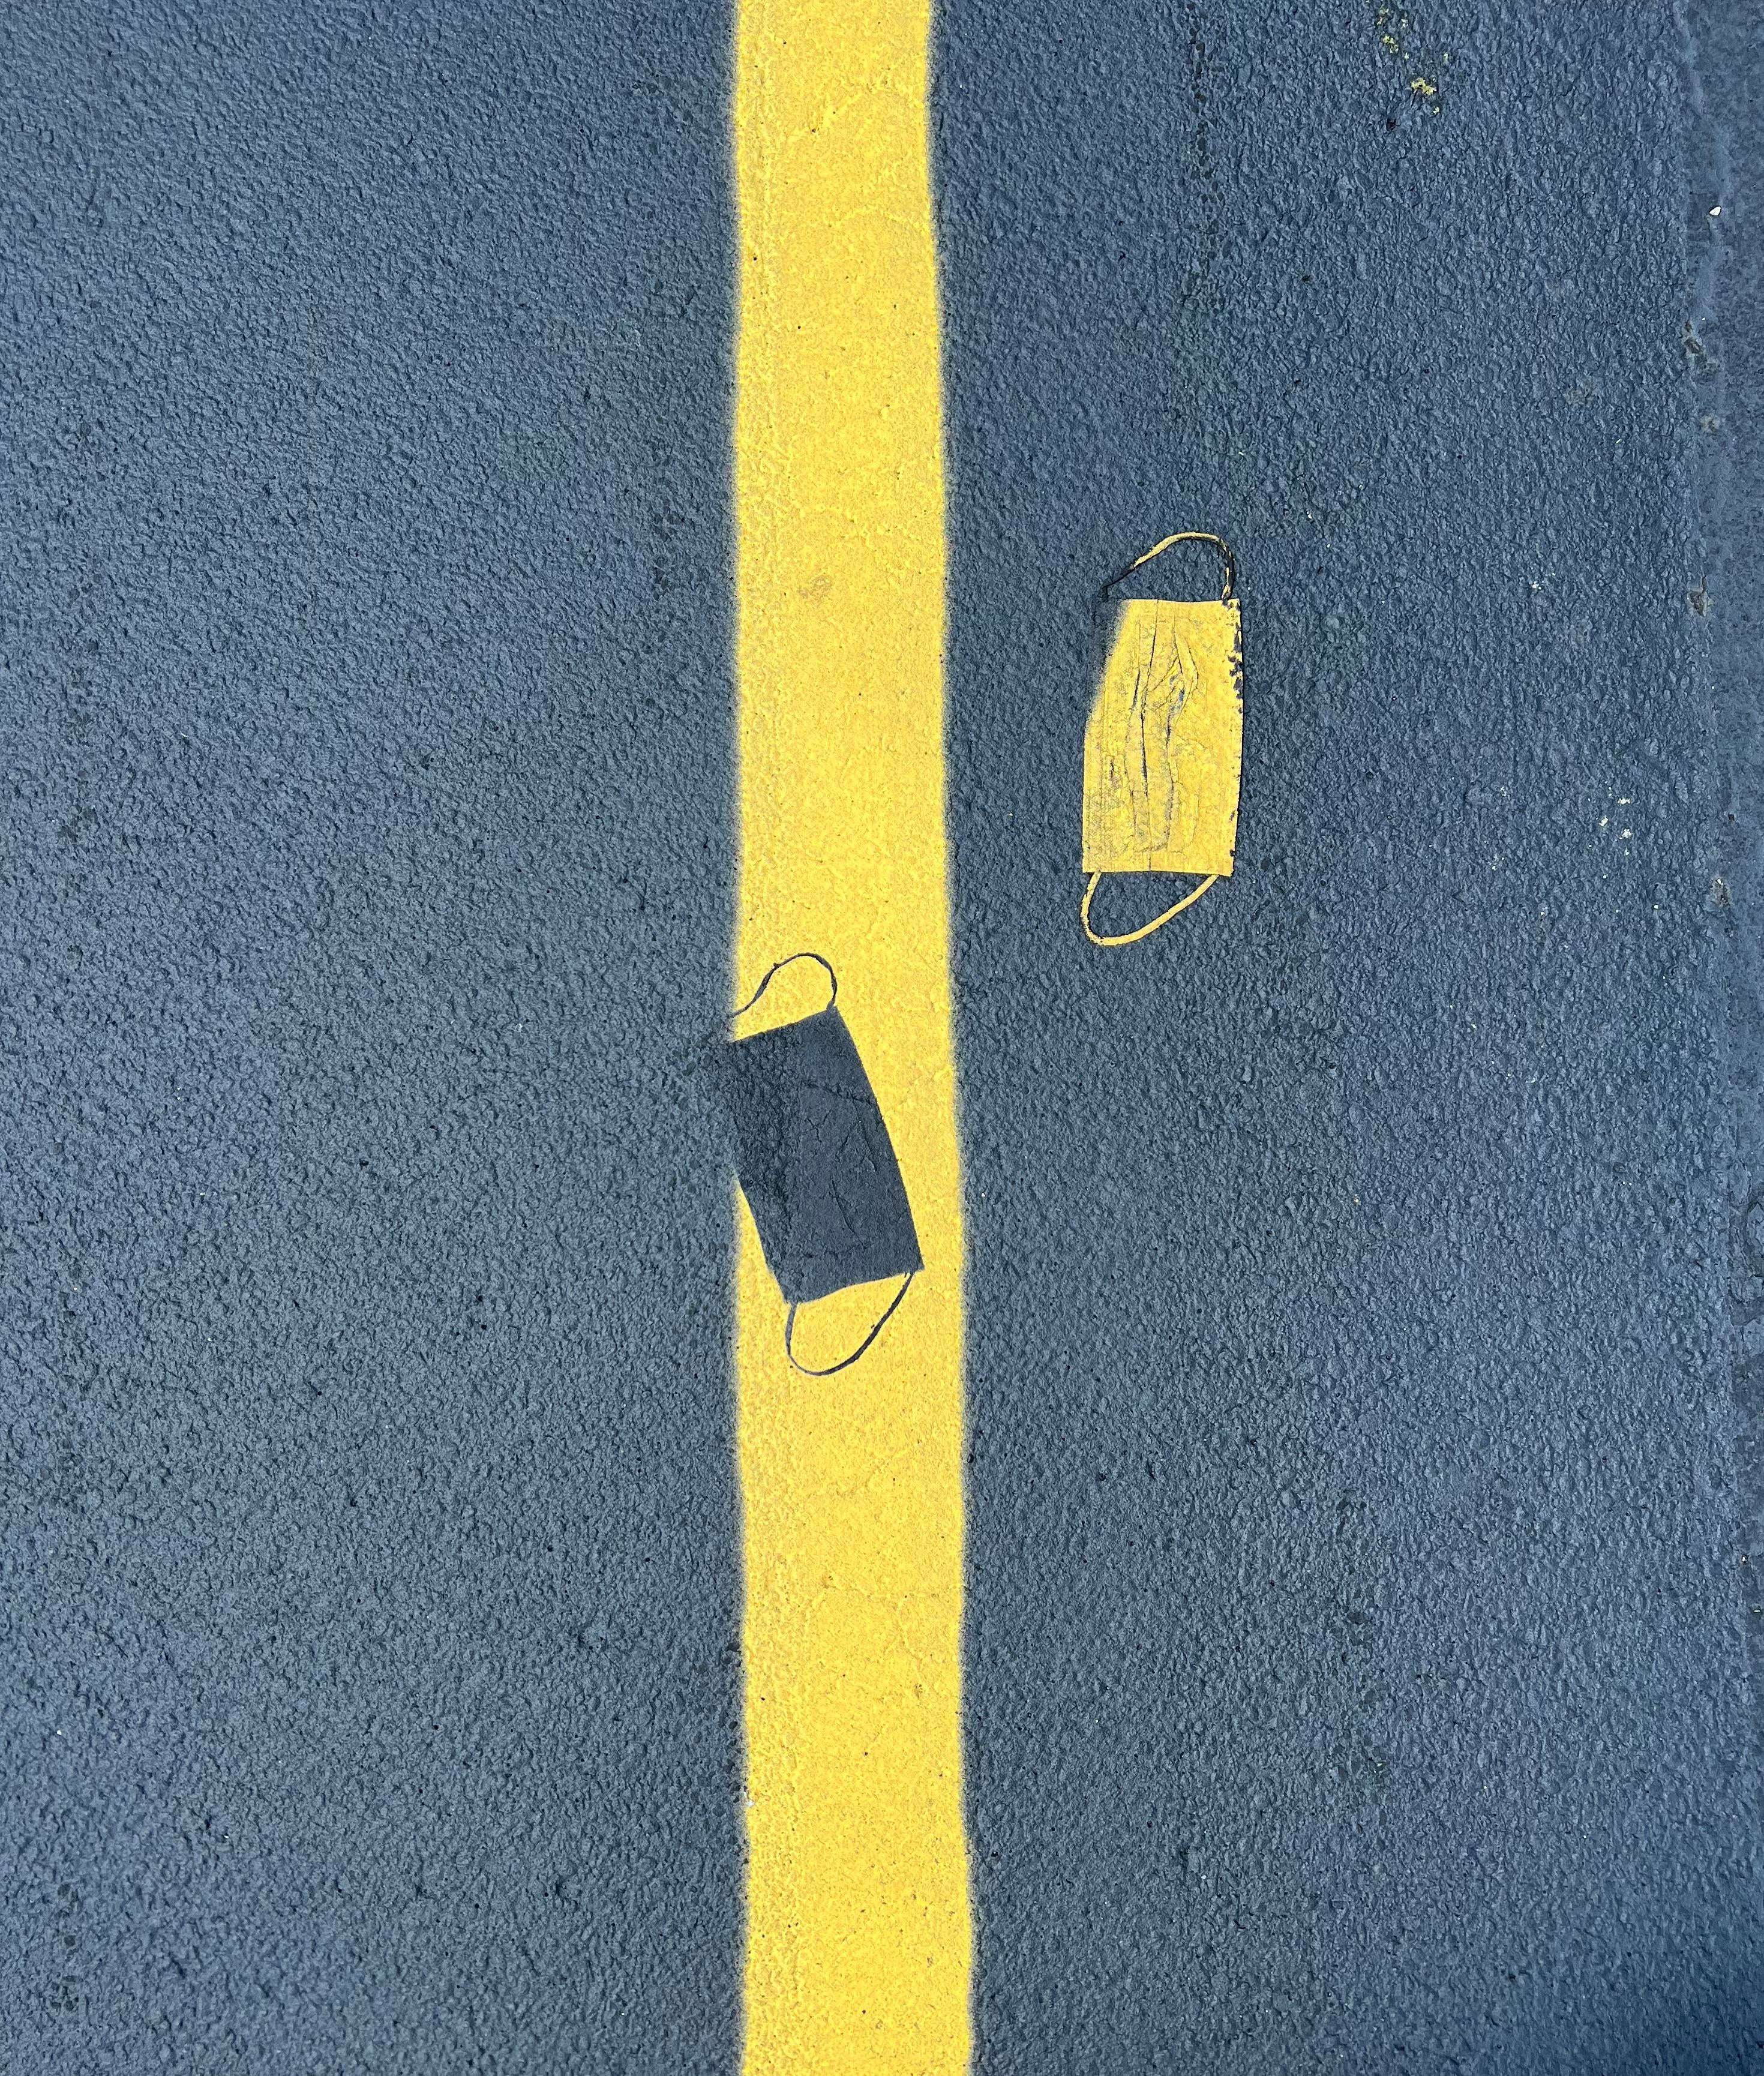 image showing [OC] This new parking lot paint job I took a picture of today